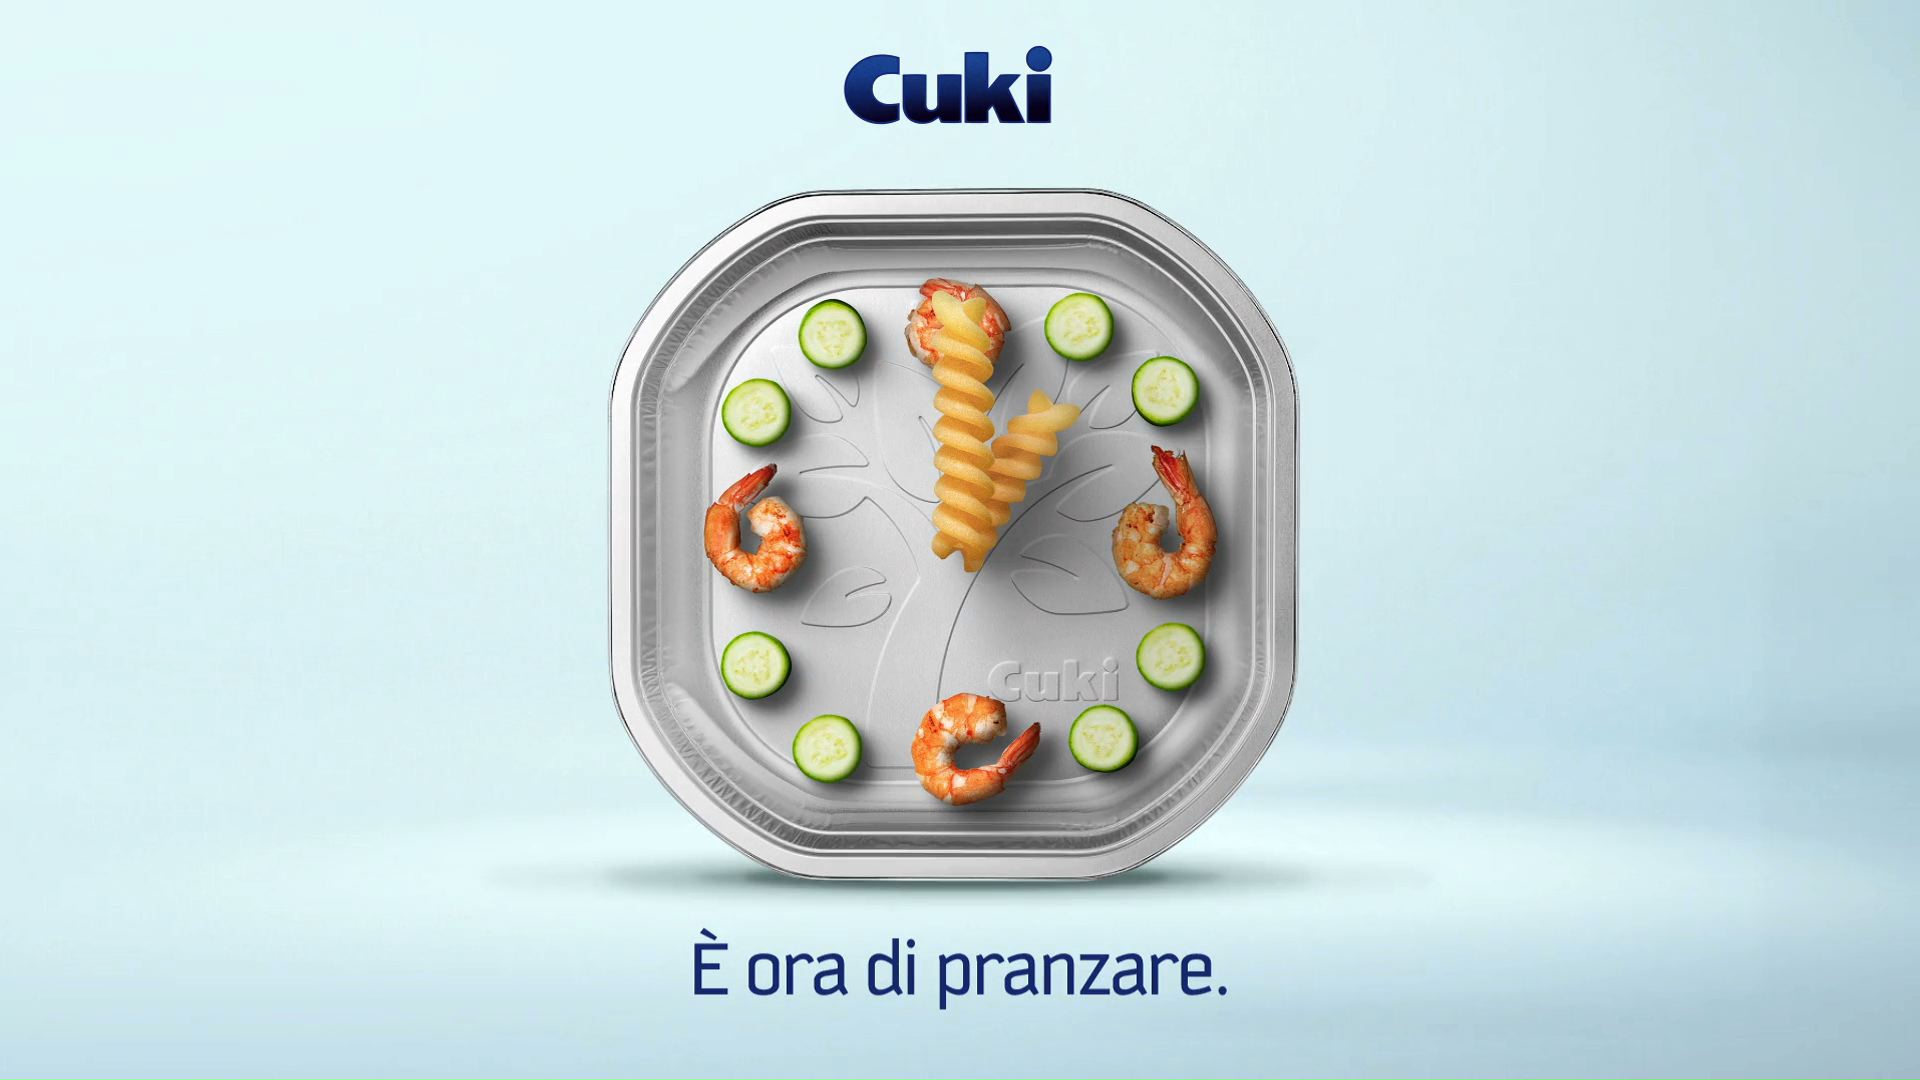 “Time to change dishes!” Cuki launches their new aluminium plates on TV with Armando Testa.